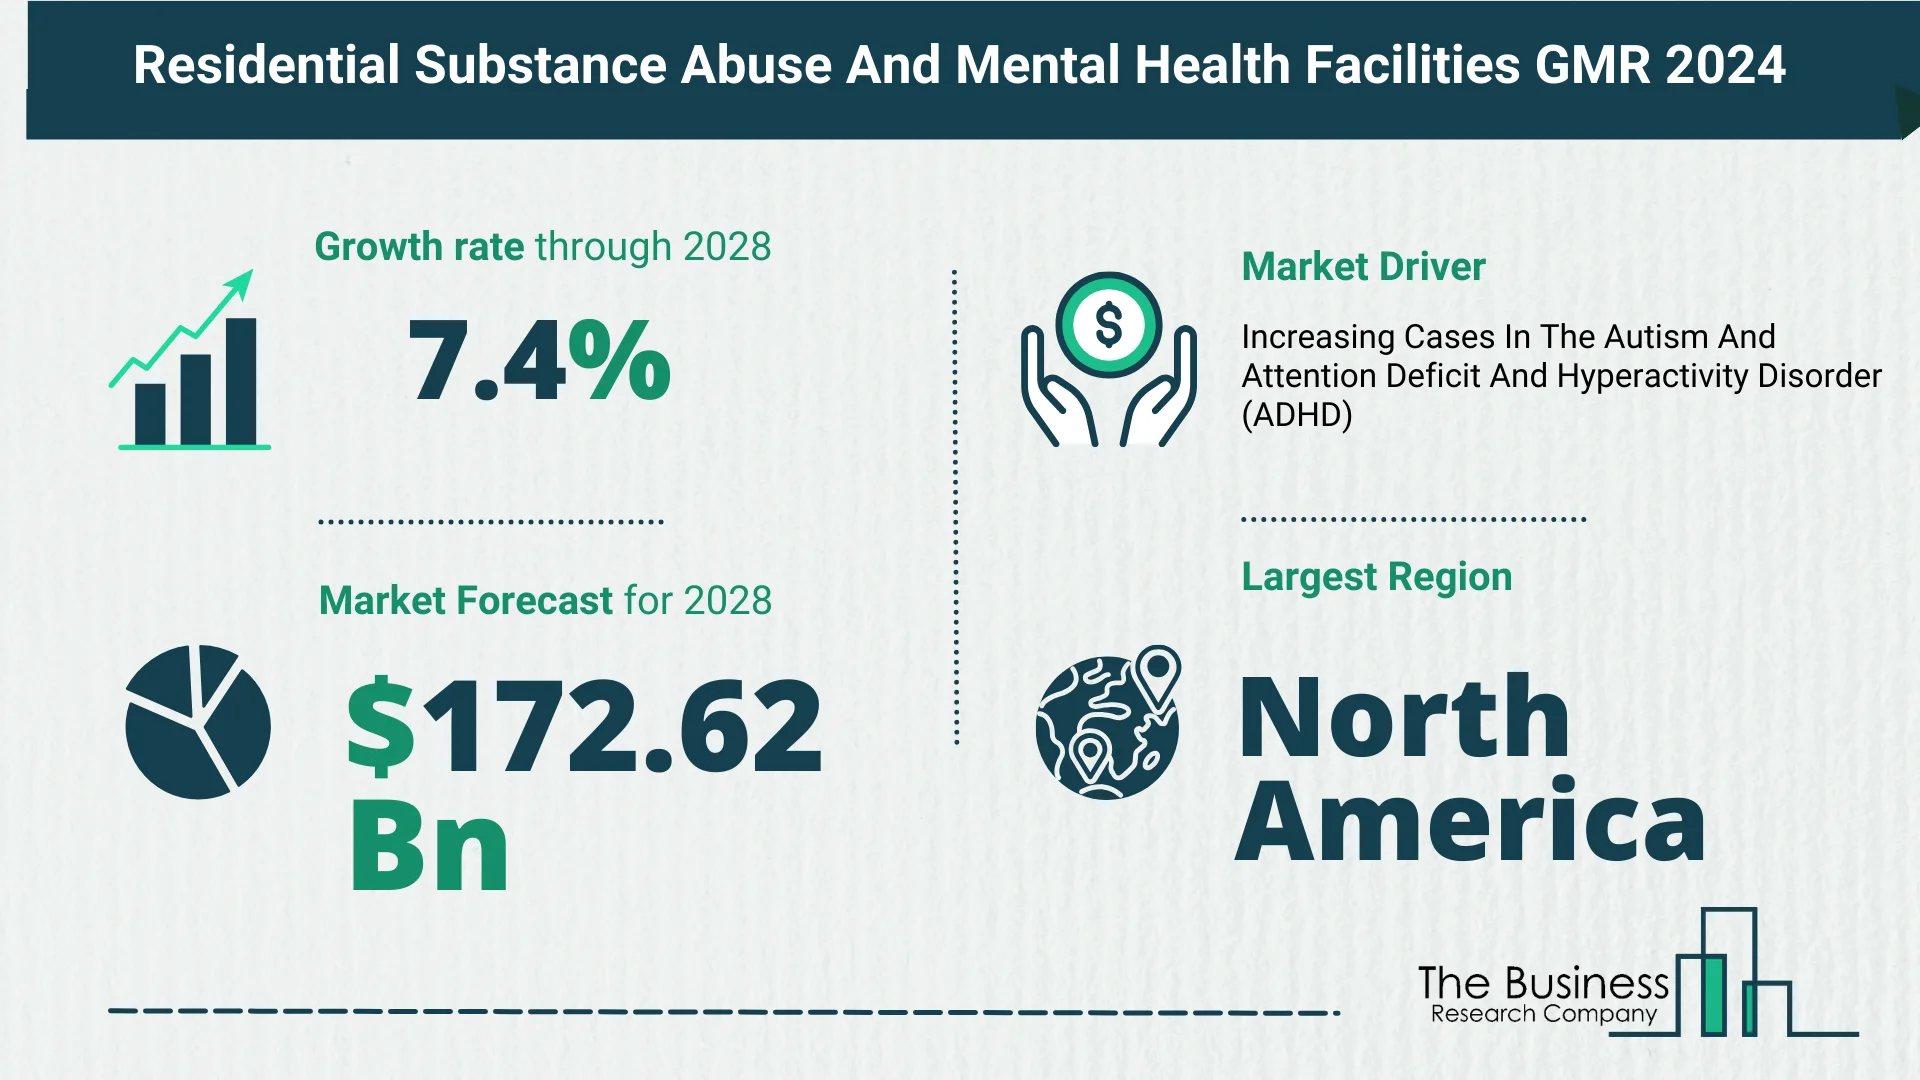 Global Residential Substance Abuse And Mental Health Facilities Market Size